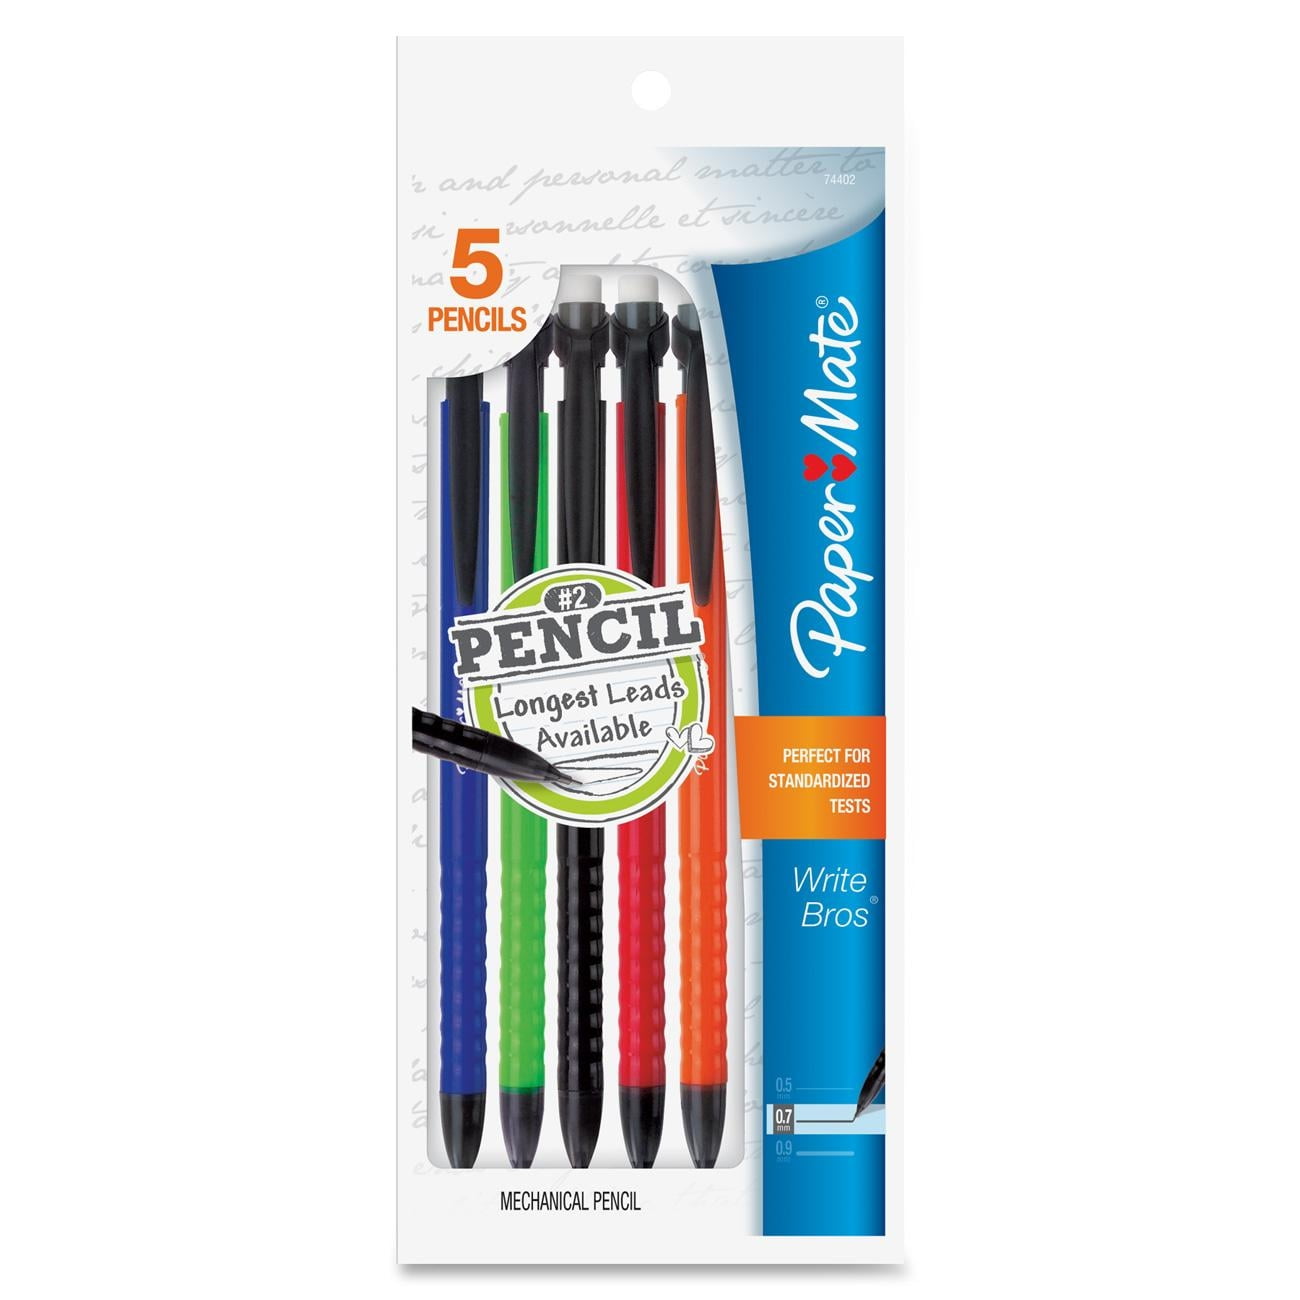 LOT OF 20 PaperMate Write Bros Mechanical Pencils 0.7mm HB #2 Assorted Colors